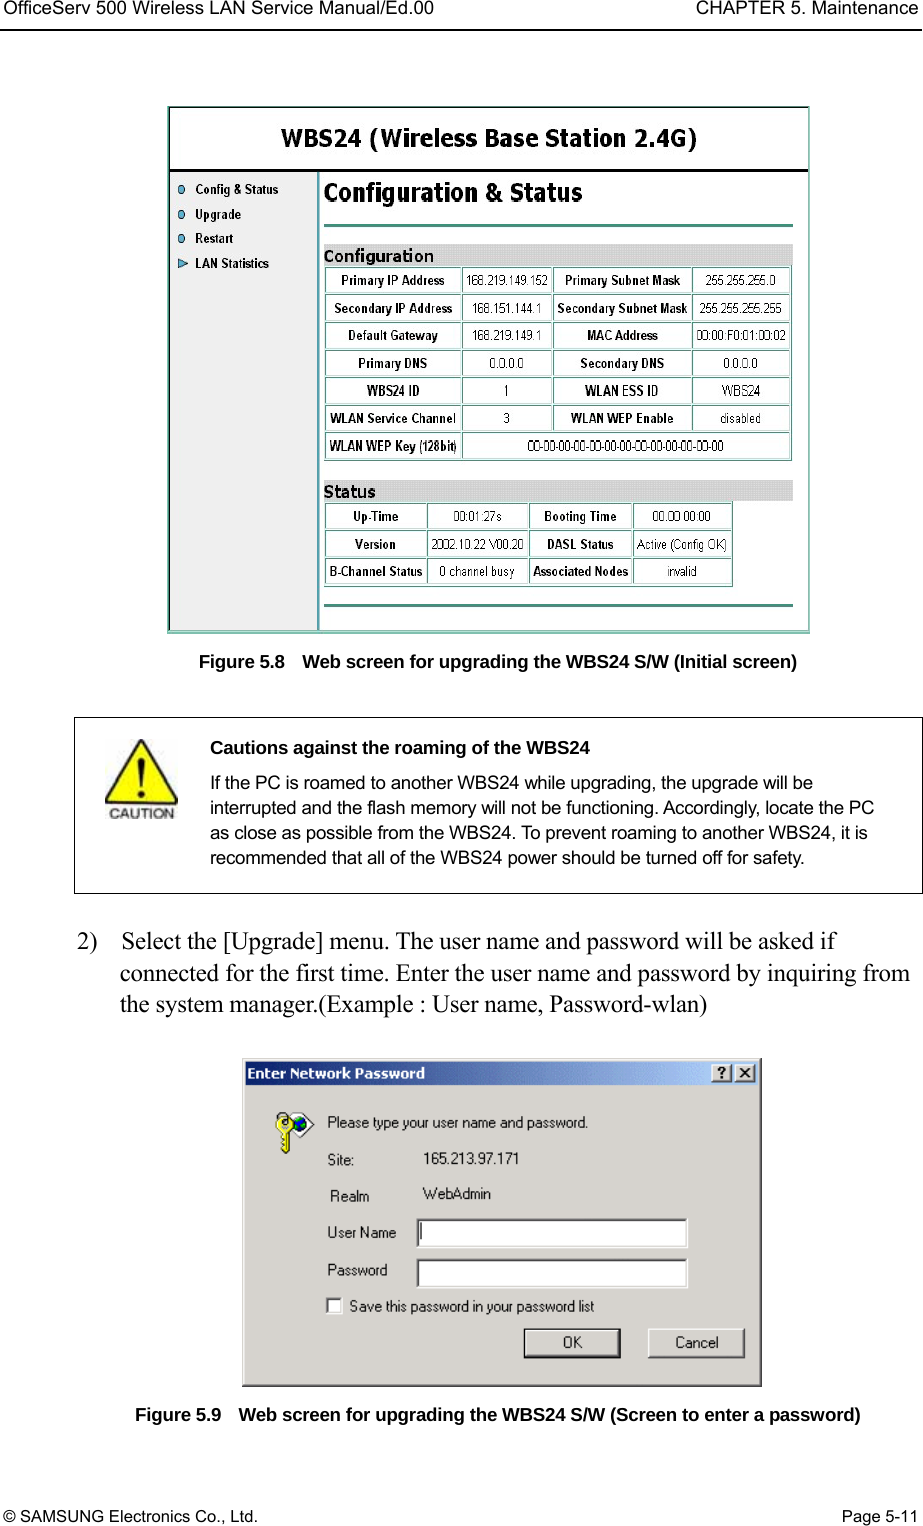 OfficeServ 500 Wireless LAN Service Manual/Ed.00  CHAPTER 5. Maintenance © SAMSUNG Electronics Co., Ltd.  Page 5-11  Figure 5.8    Web screen for upgrading the WBS24 S/W (Initial screen)    Cautions against the roaming of the WBS24   If the PC is roamed to another WBS24 while upgrading, the upgrade will be interrupted and the flash memory will not be functioning. Accordingly, locate the PC as close as possible from the WBS24. To prevent roaming to another WBS24, it is recommended that all of the WBS24 power should be turned off for safety.  2)    Select the [Upgrade] menu. The user name and password will be asked if connected for the first time. Enter the user name and password by inquiring from the system manager.(Example : User name, Password-wlan)   Figure 5.9    Web screen for upgrading the WBS24 S/W (Screen to enter a password) 